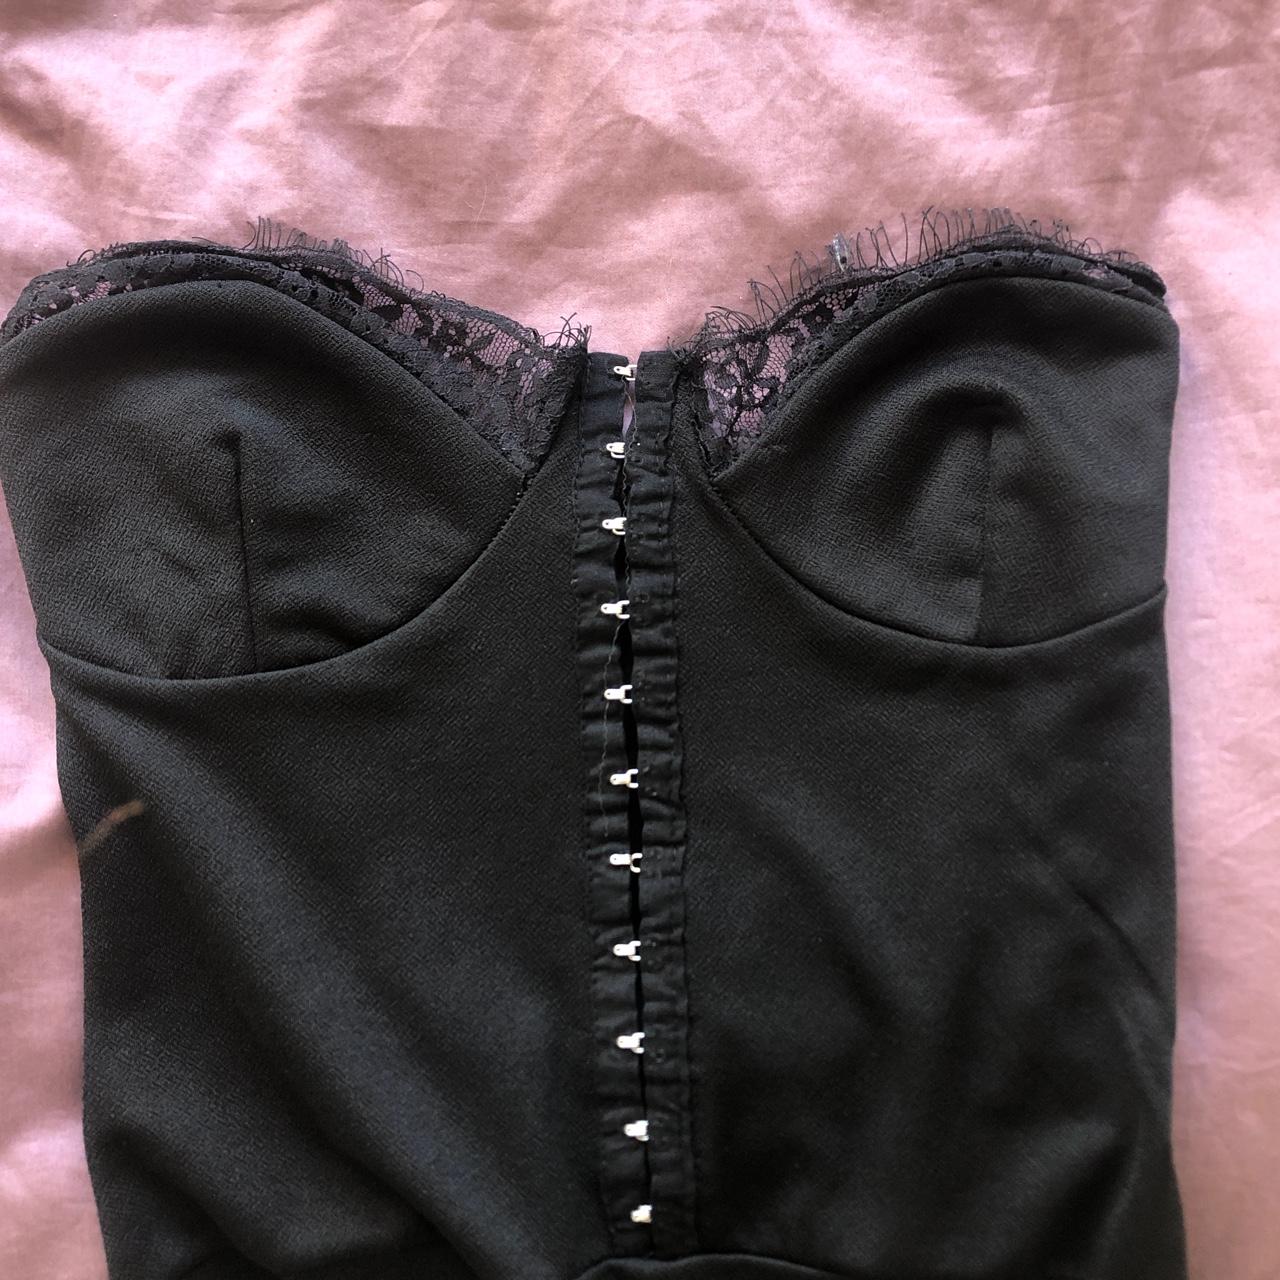 black corset bodysuit with bow 💝 only used for 4hrs - Depop